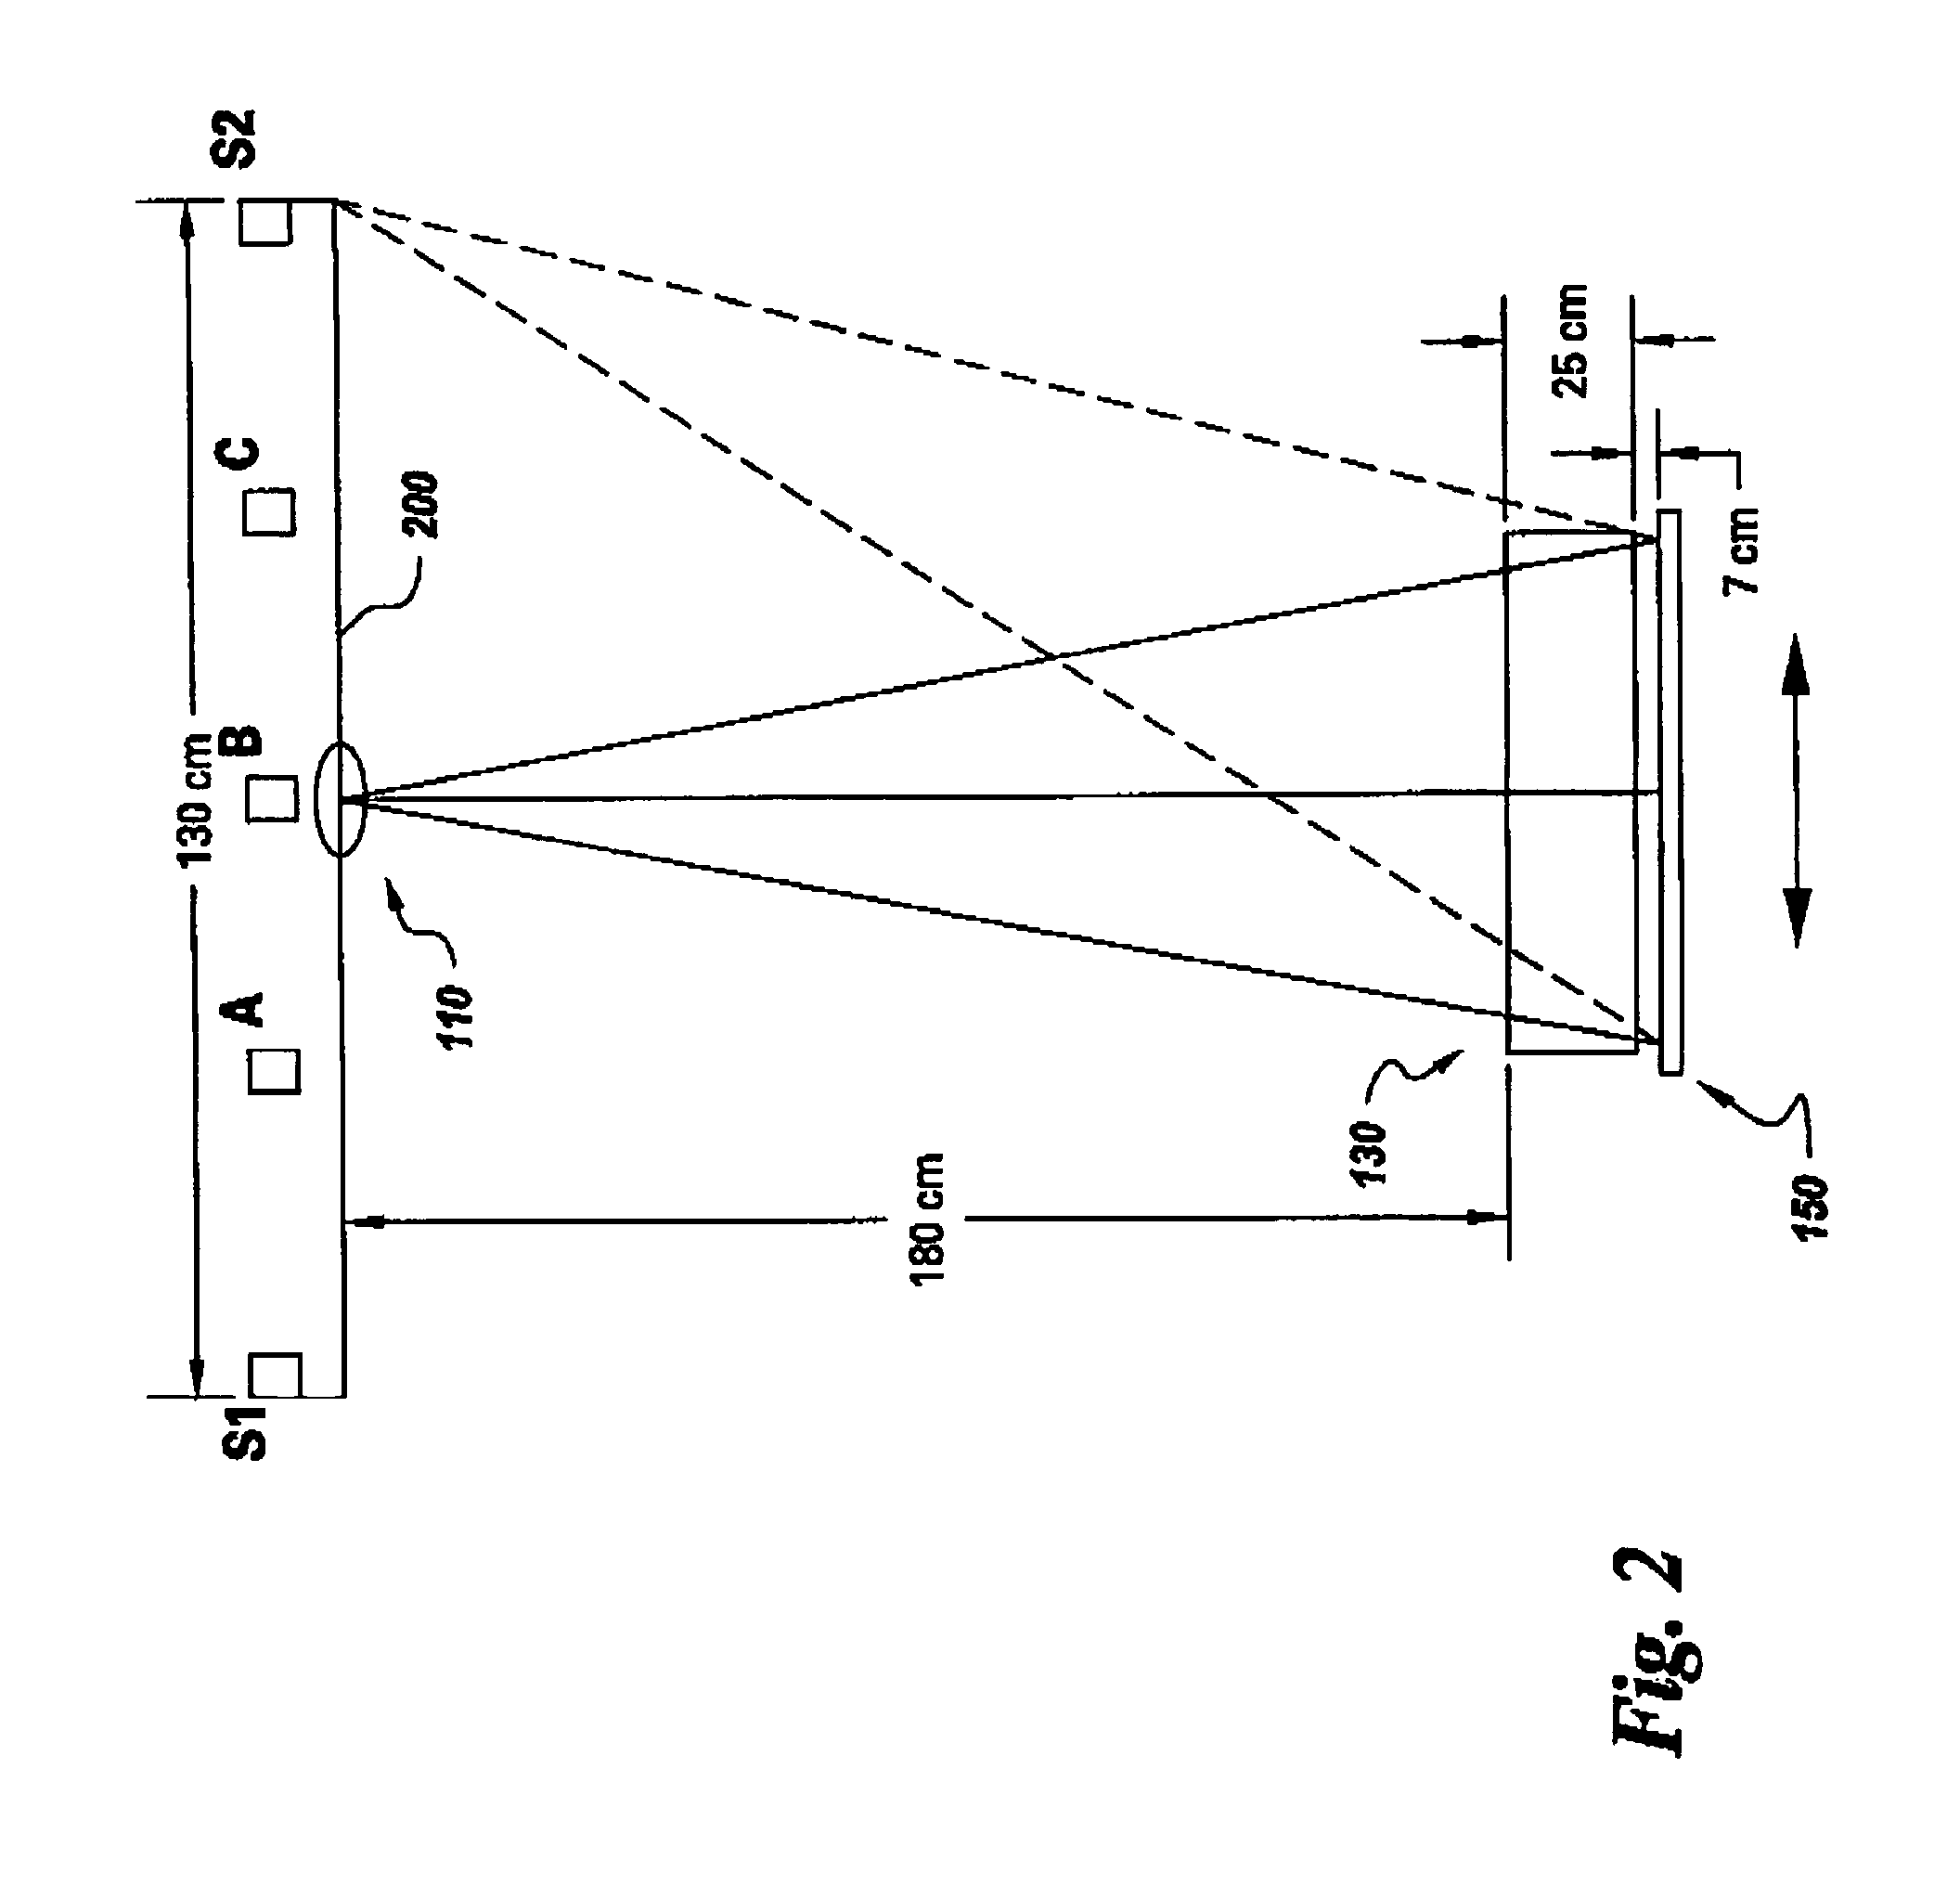 Continuous scan RAD tomosynthesis system and method